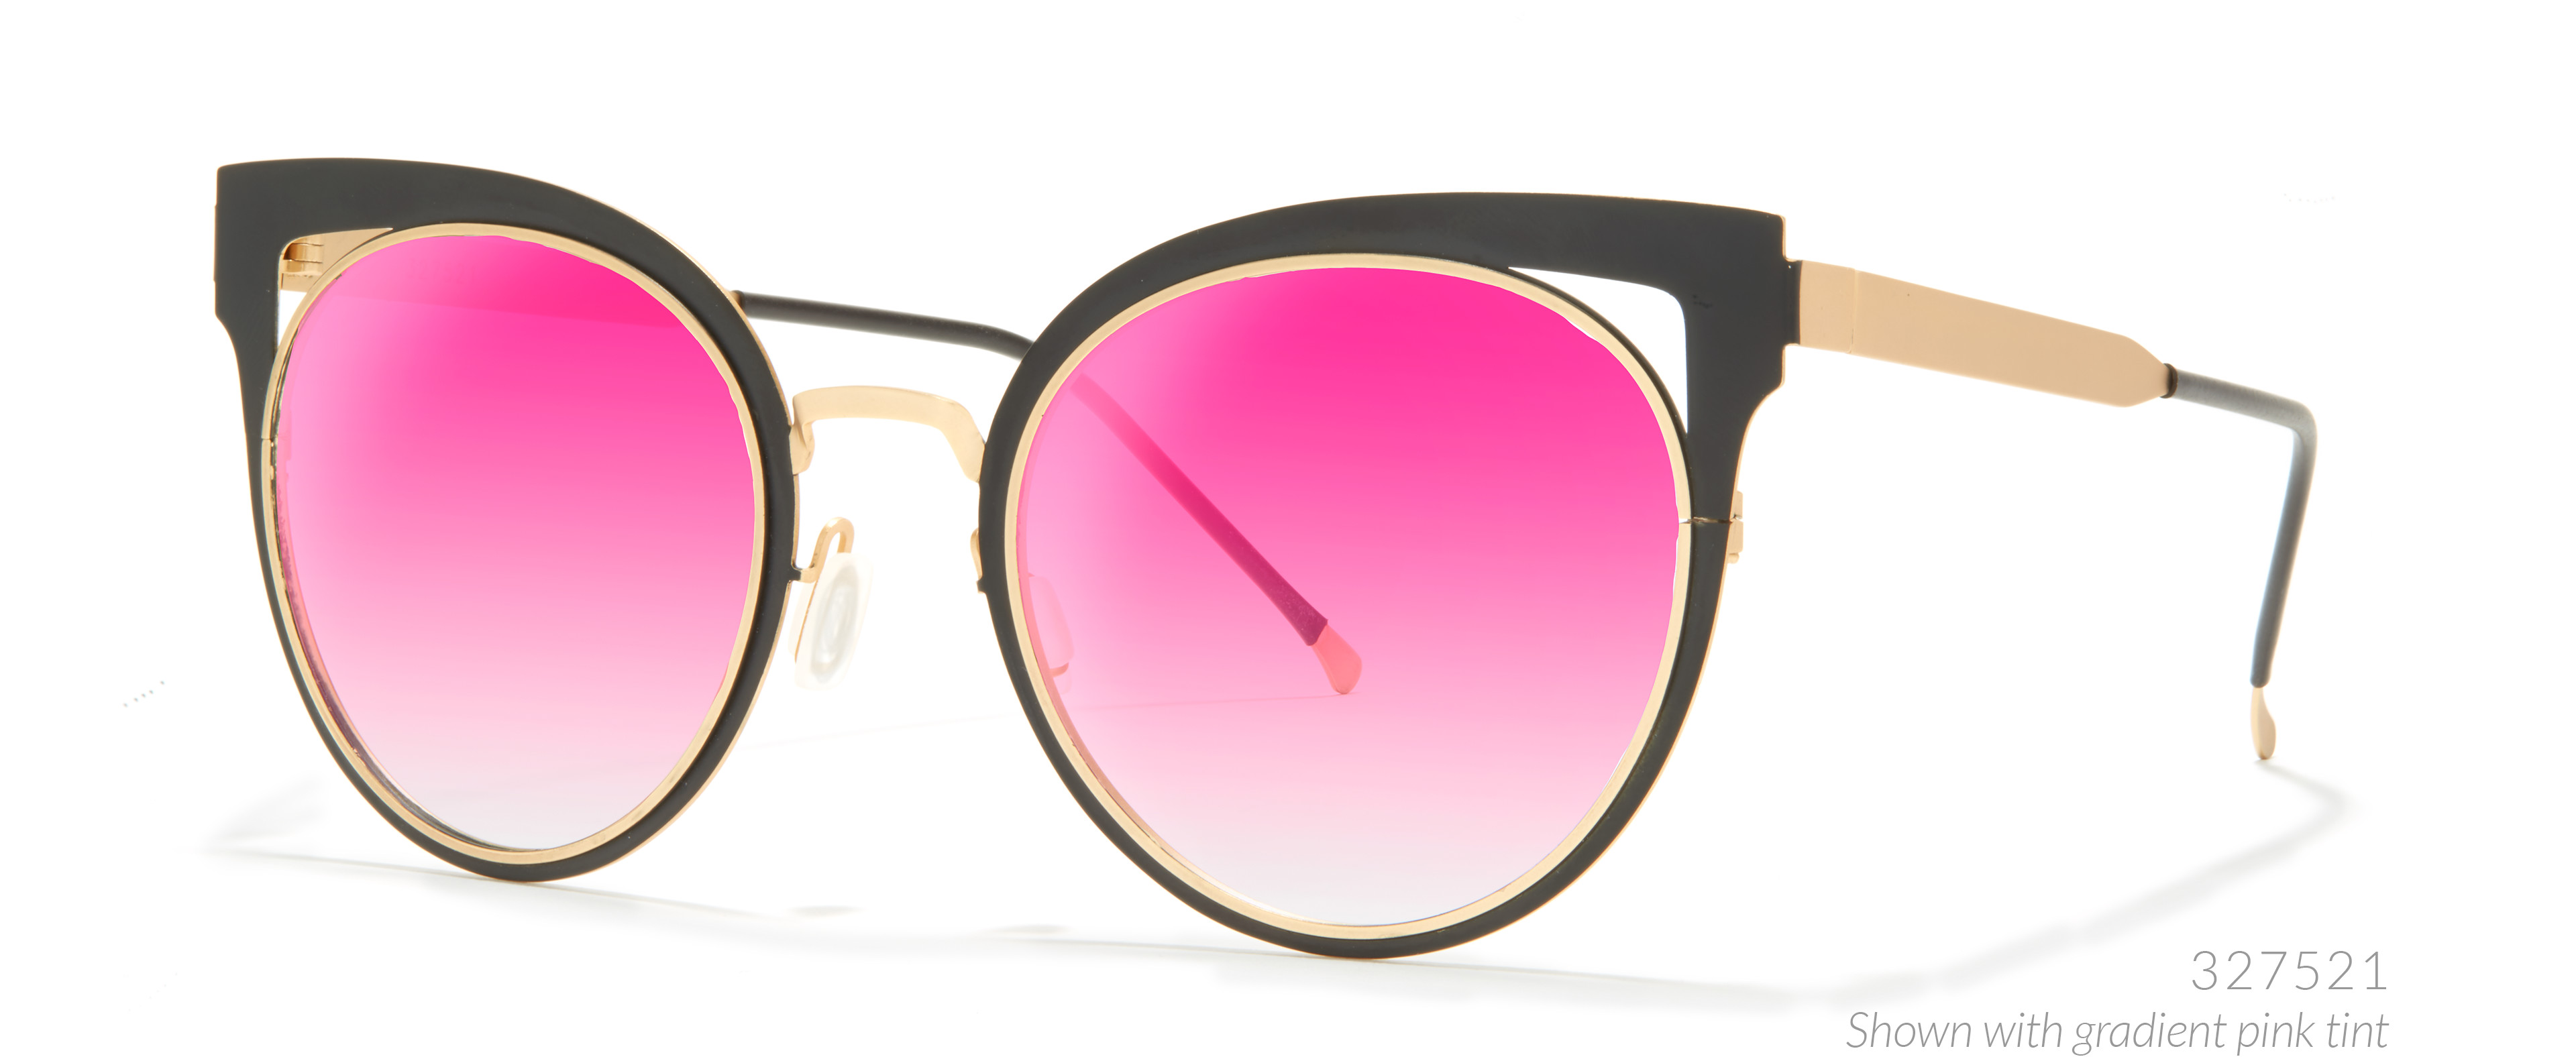 black and pink cat eye glasses